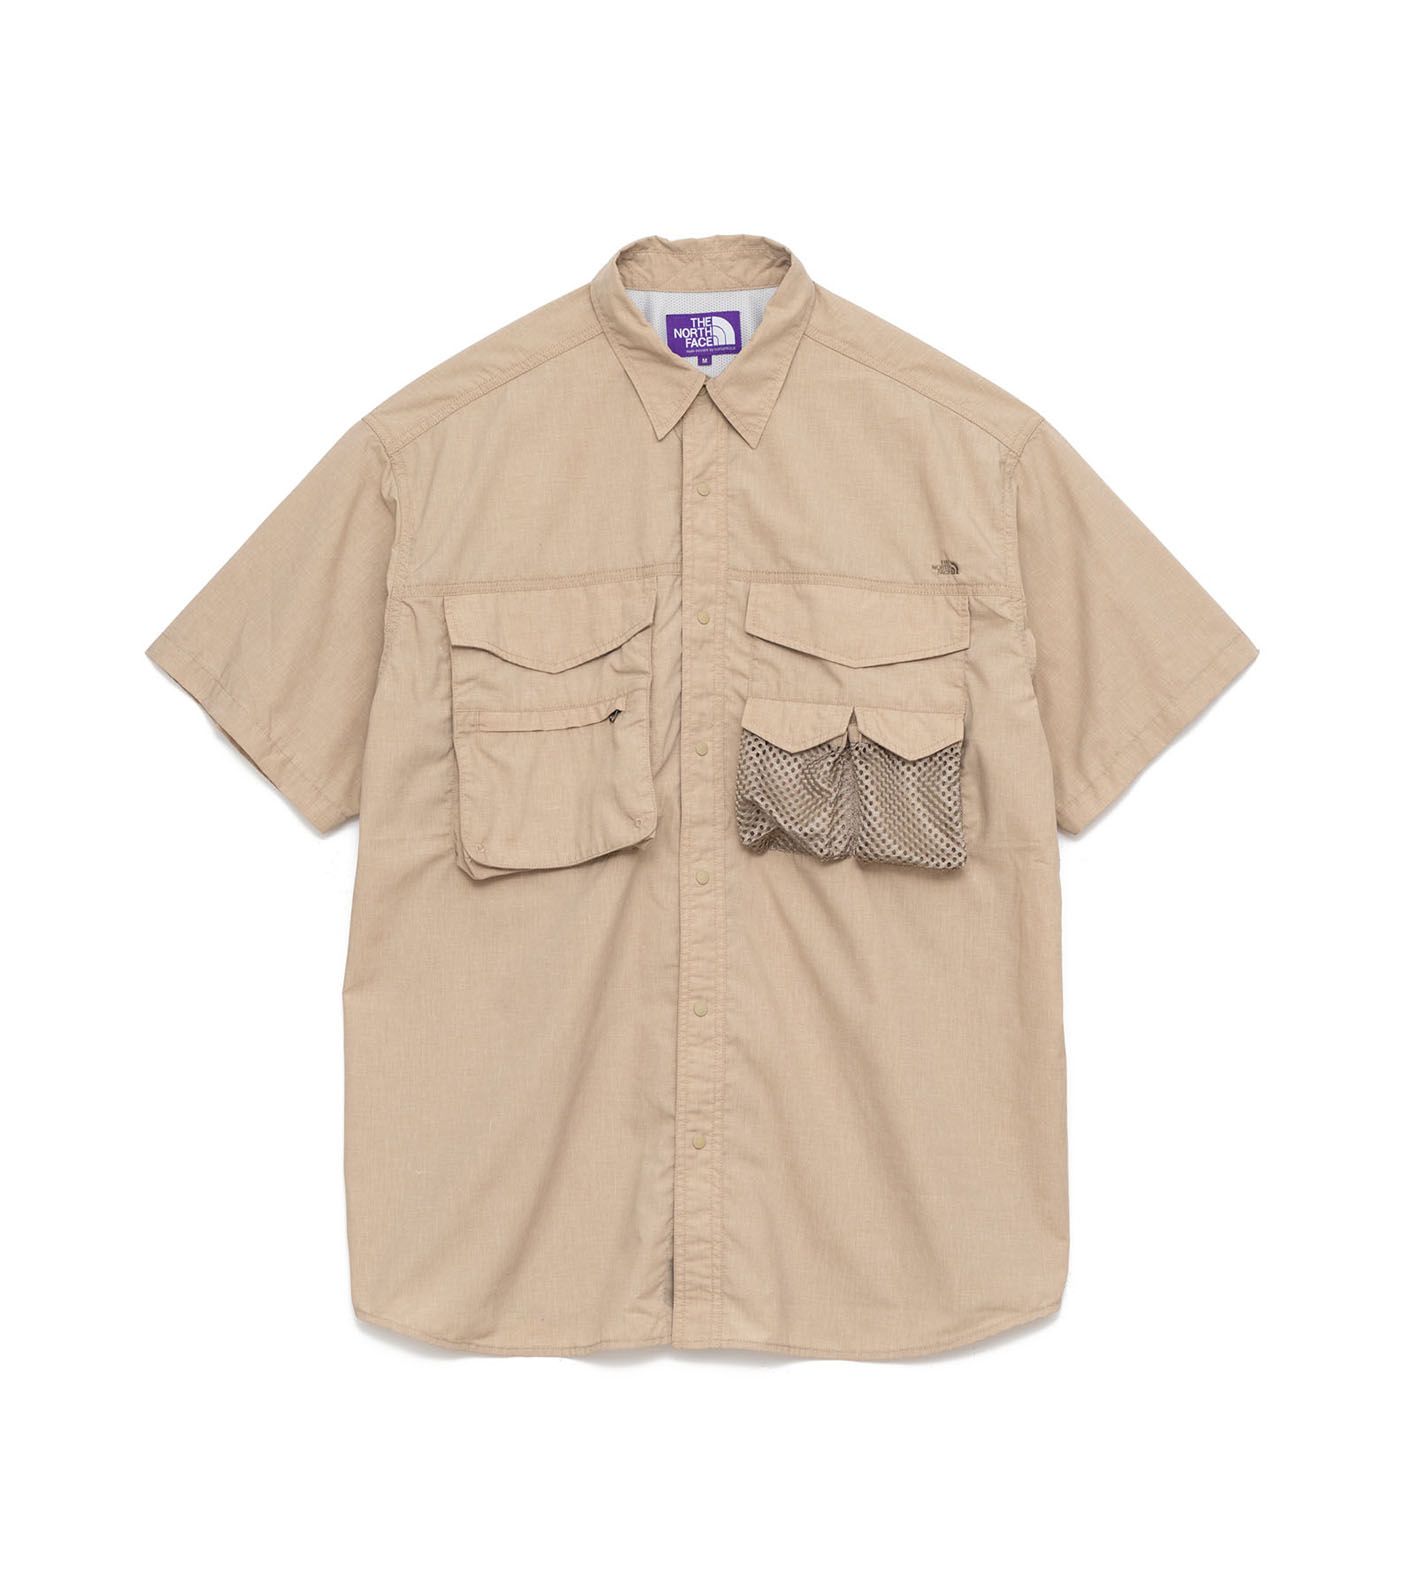 THE NORTH FACE PURPLE LABEL - Polyester Linen Field H/S Shirt / K 